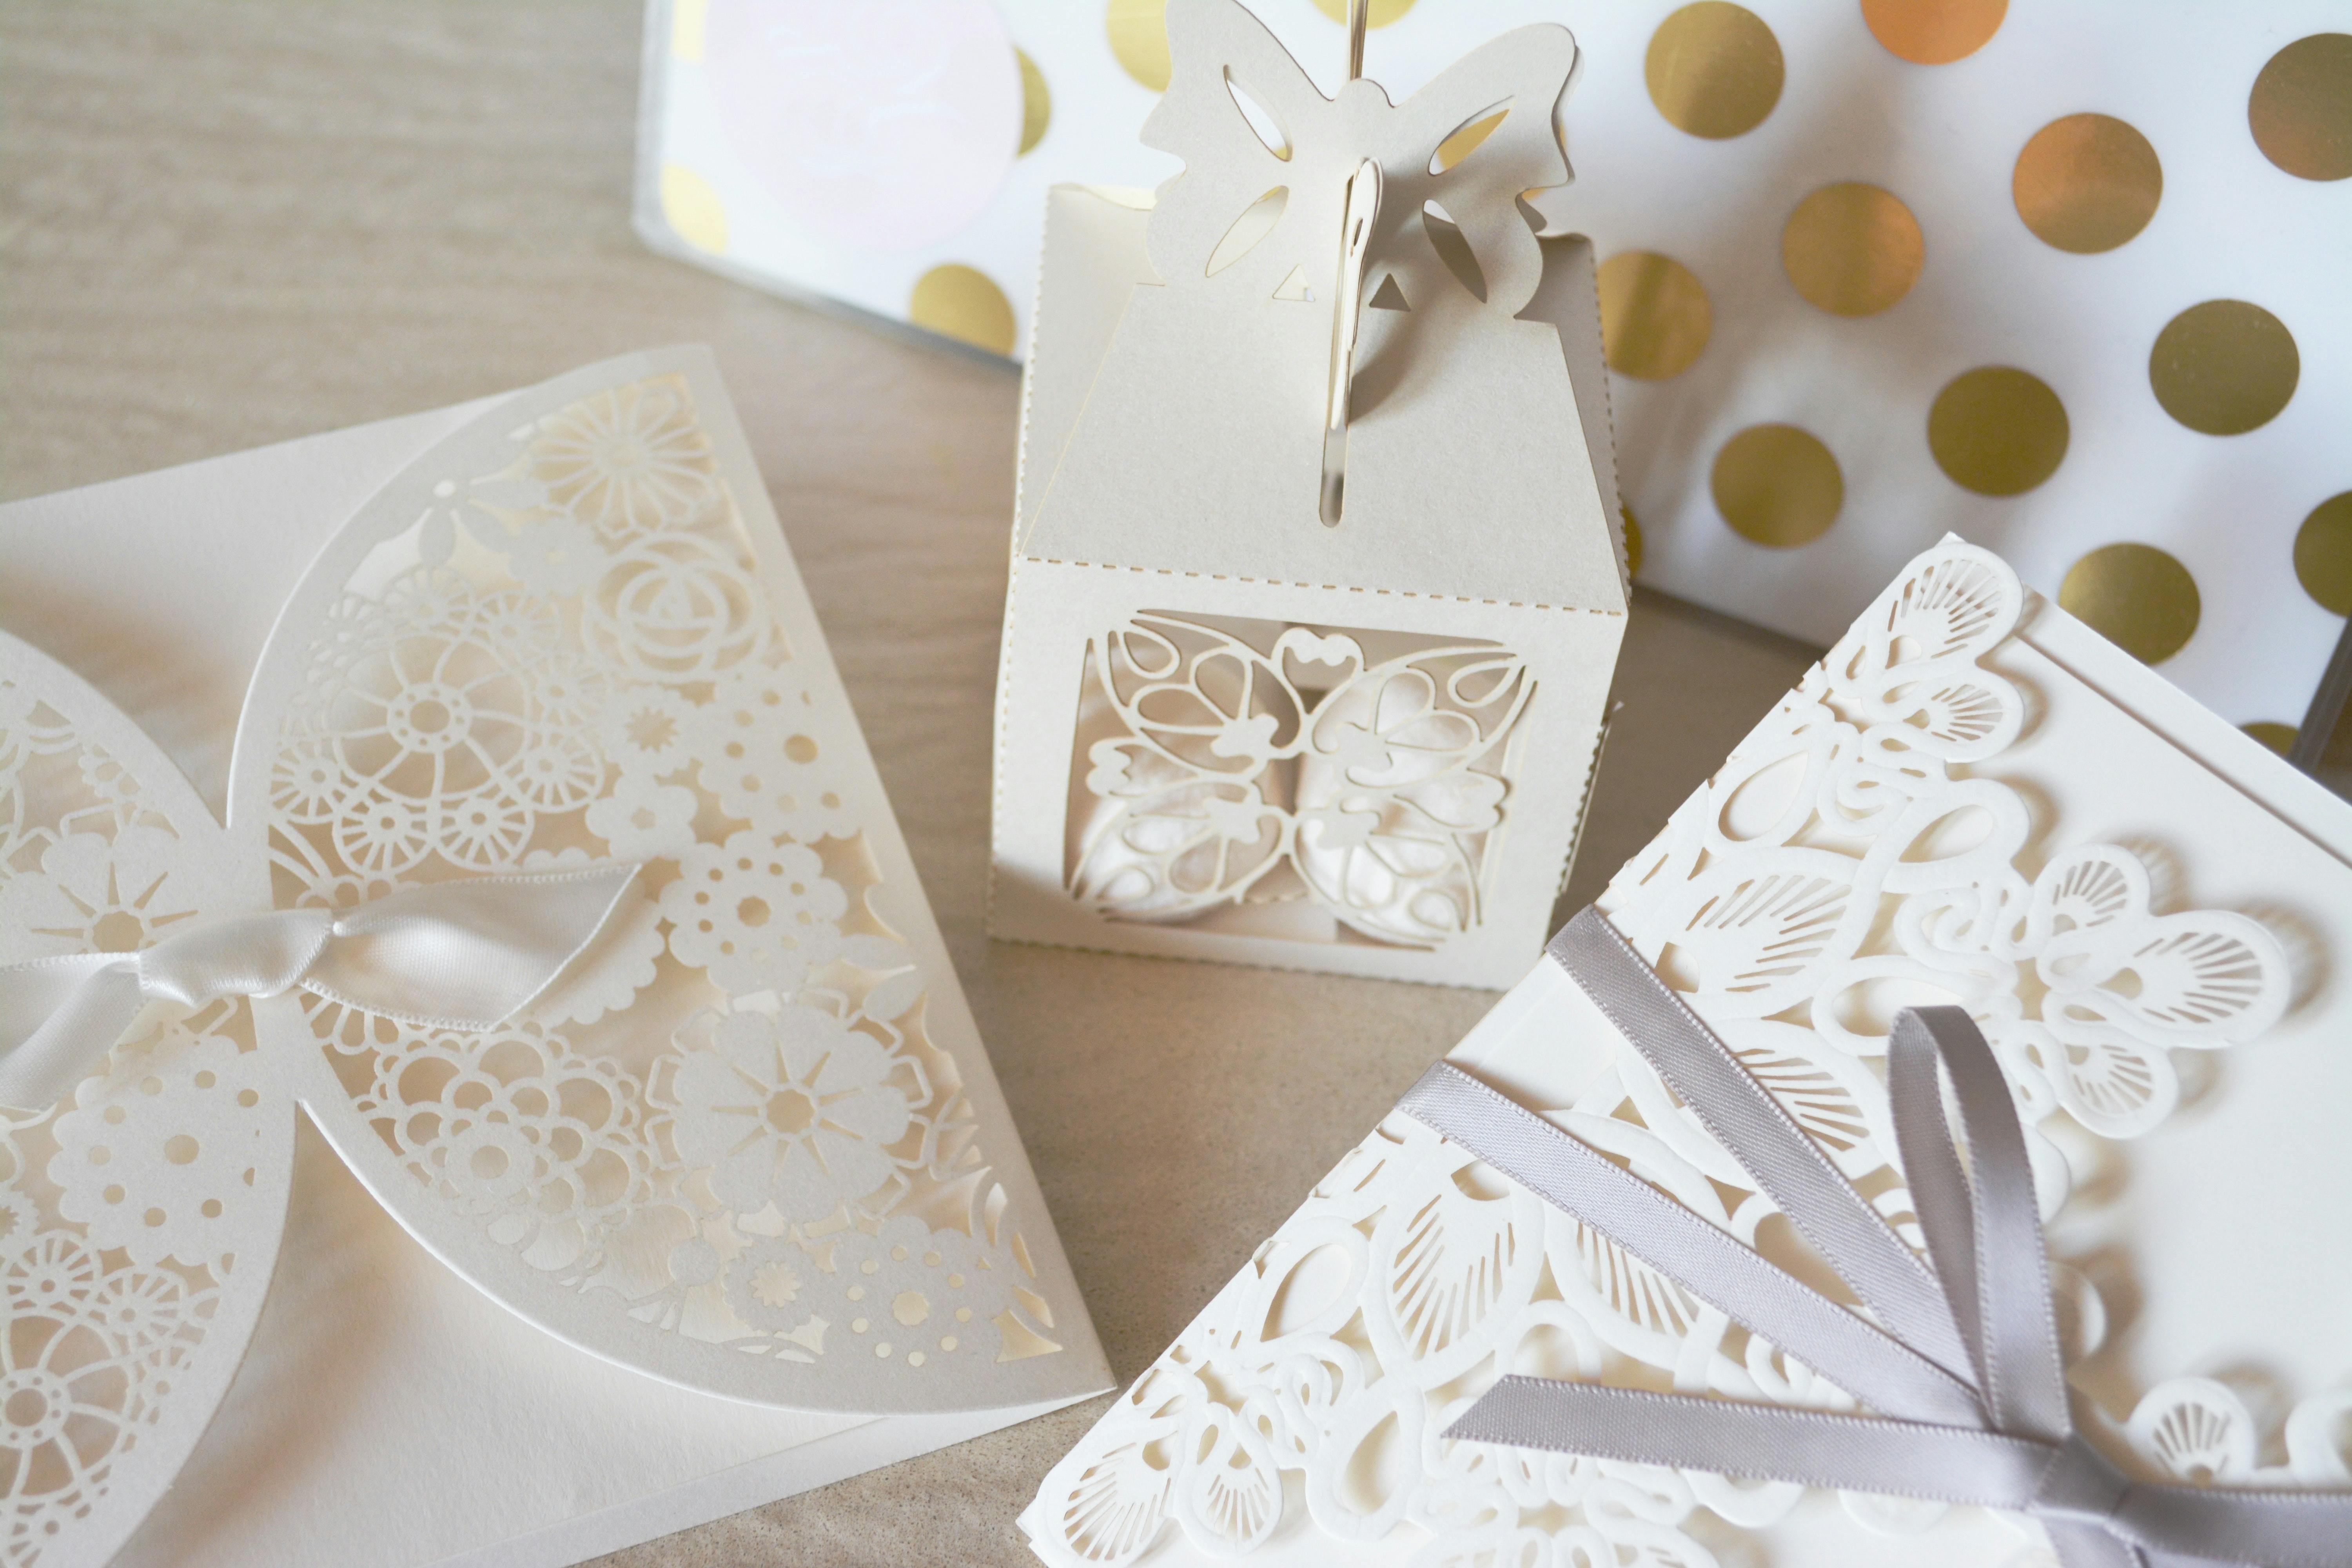 Some gifts wrapped in white boxes.